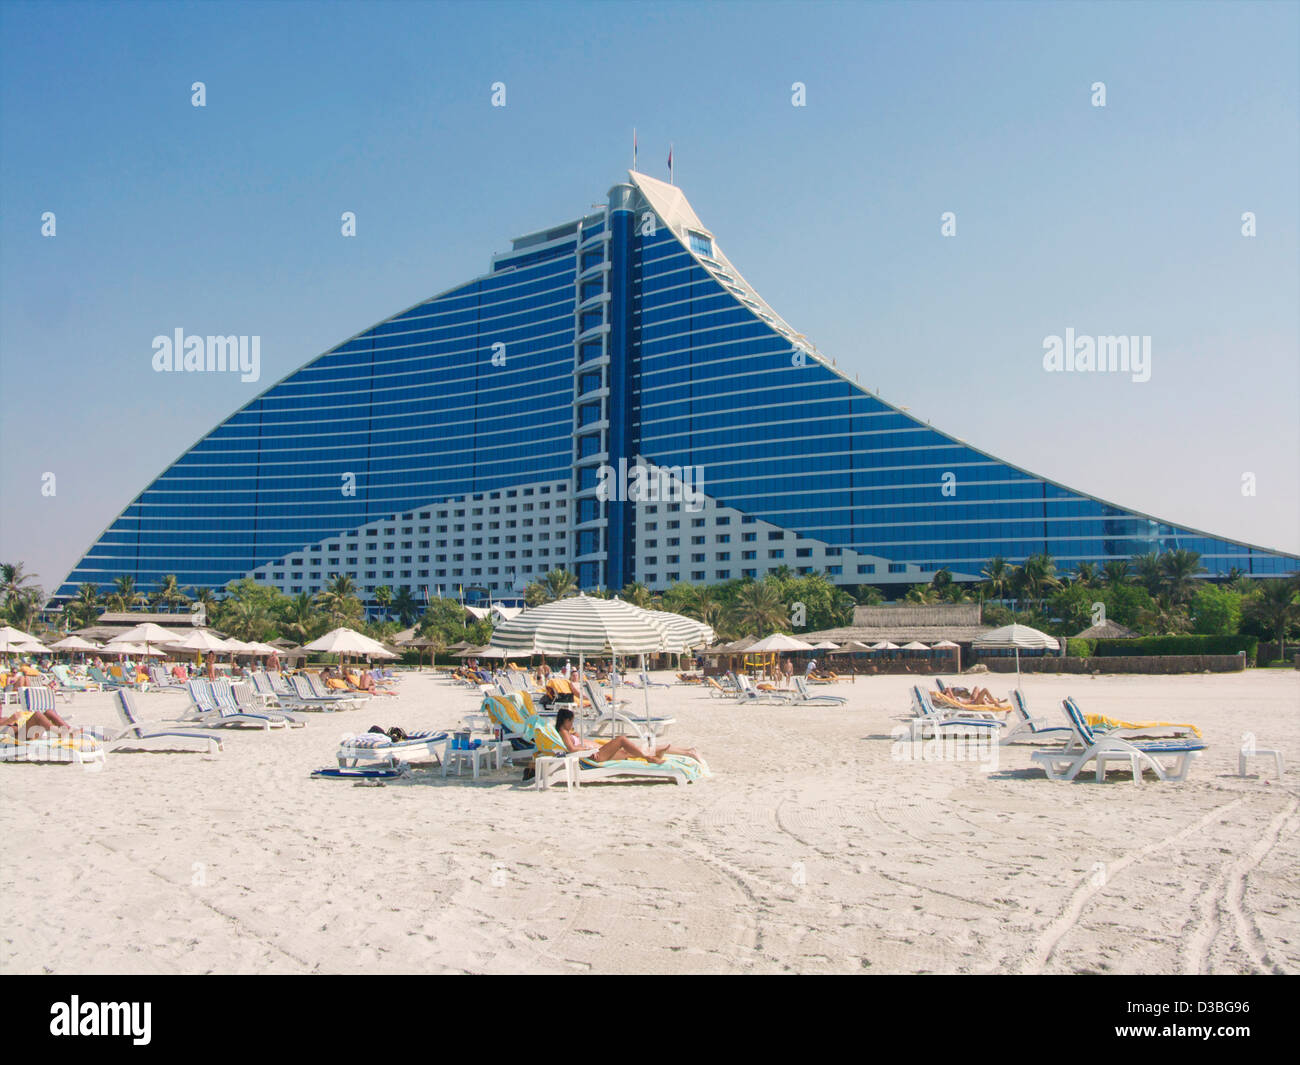 Dubai Chicago Beach Hotel High Resolution Stock Photography And Images